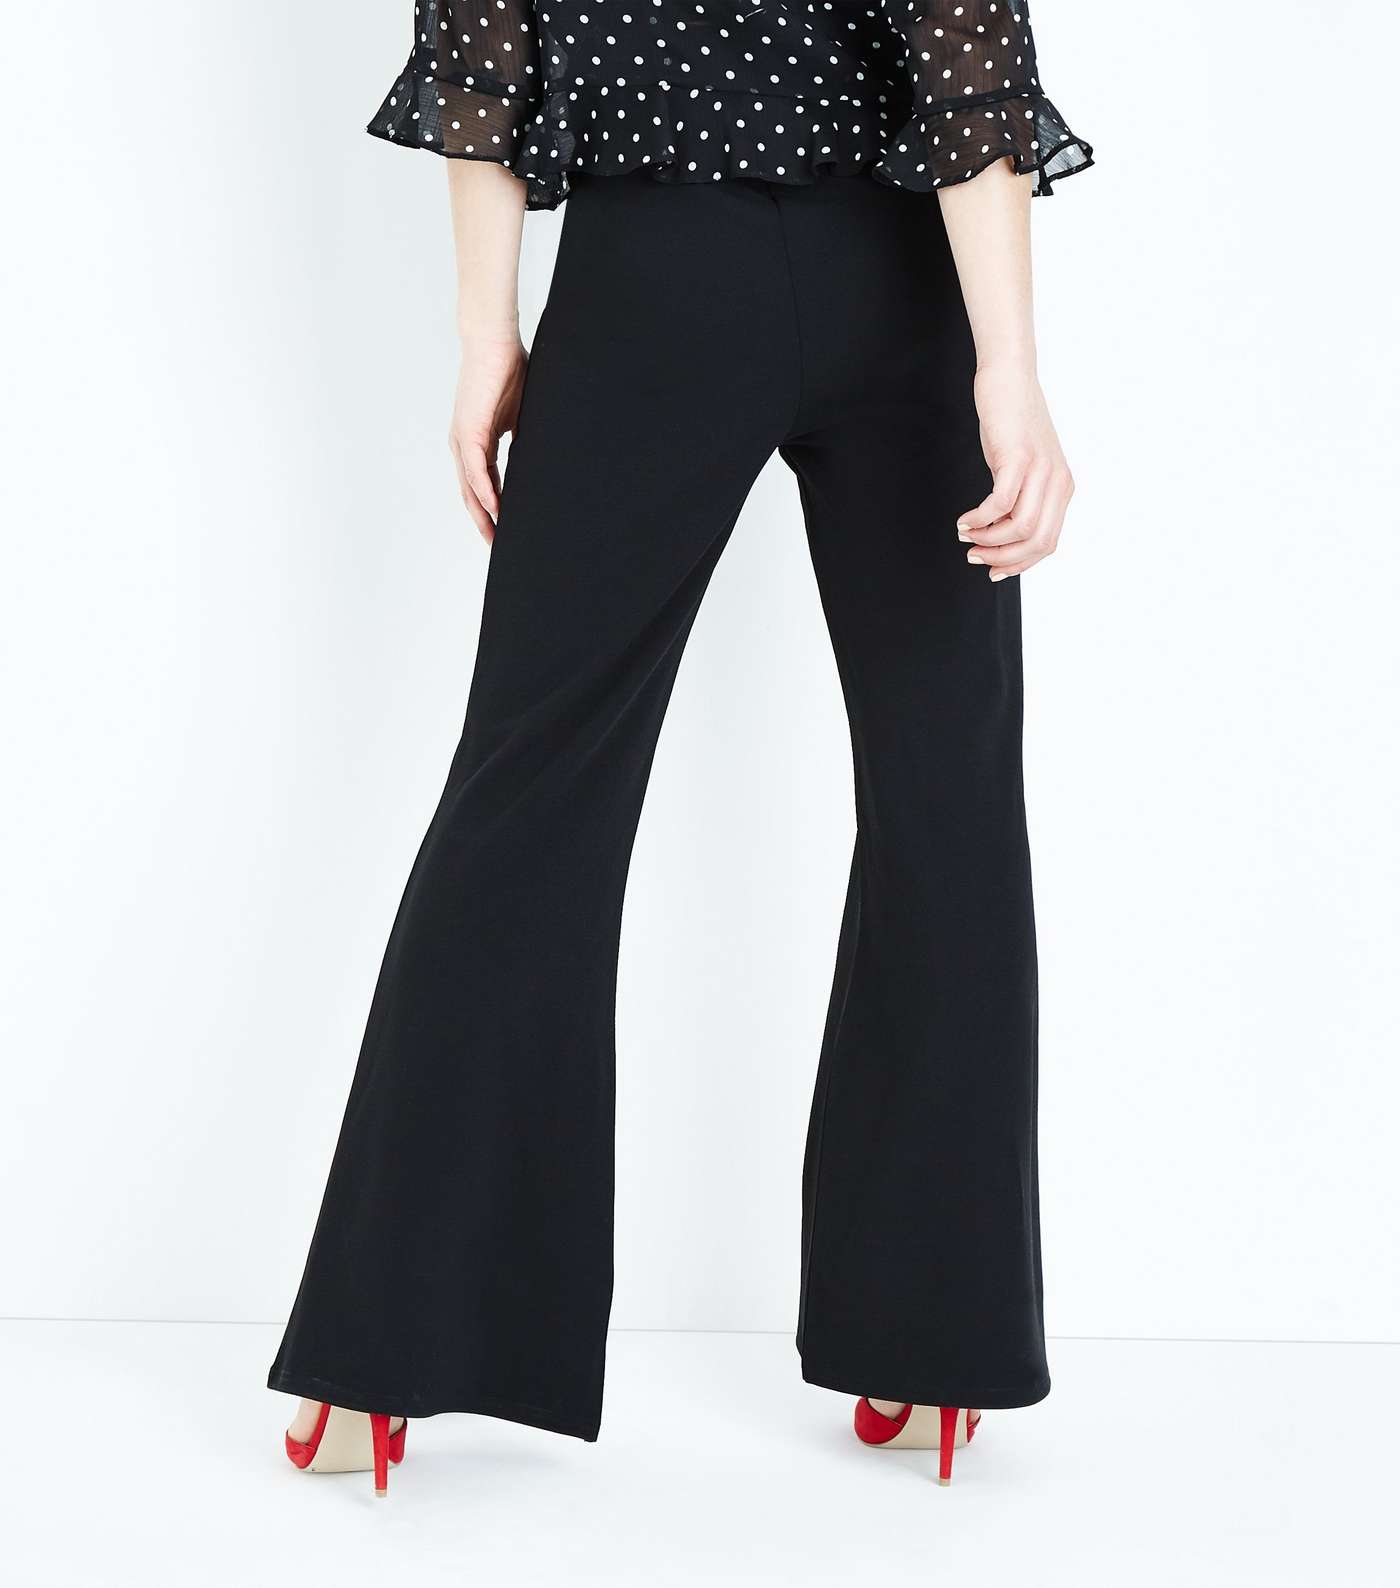 Cameo Rose Black Piped Flared Trousers Image 3